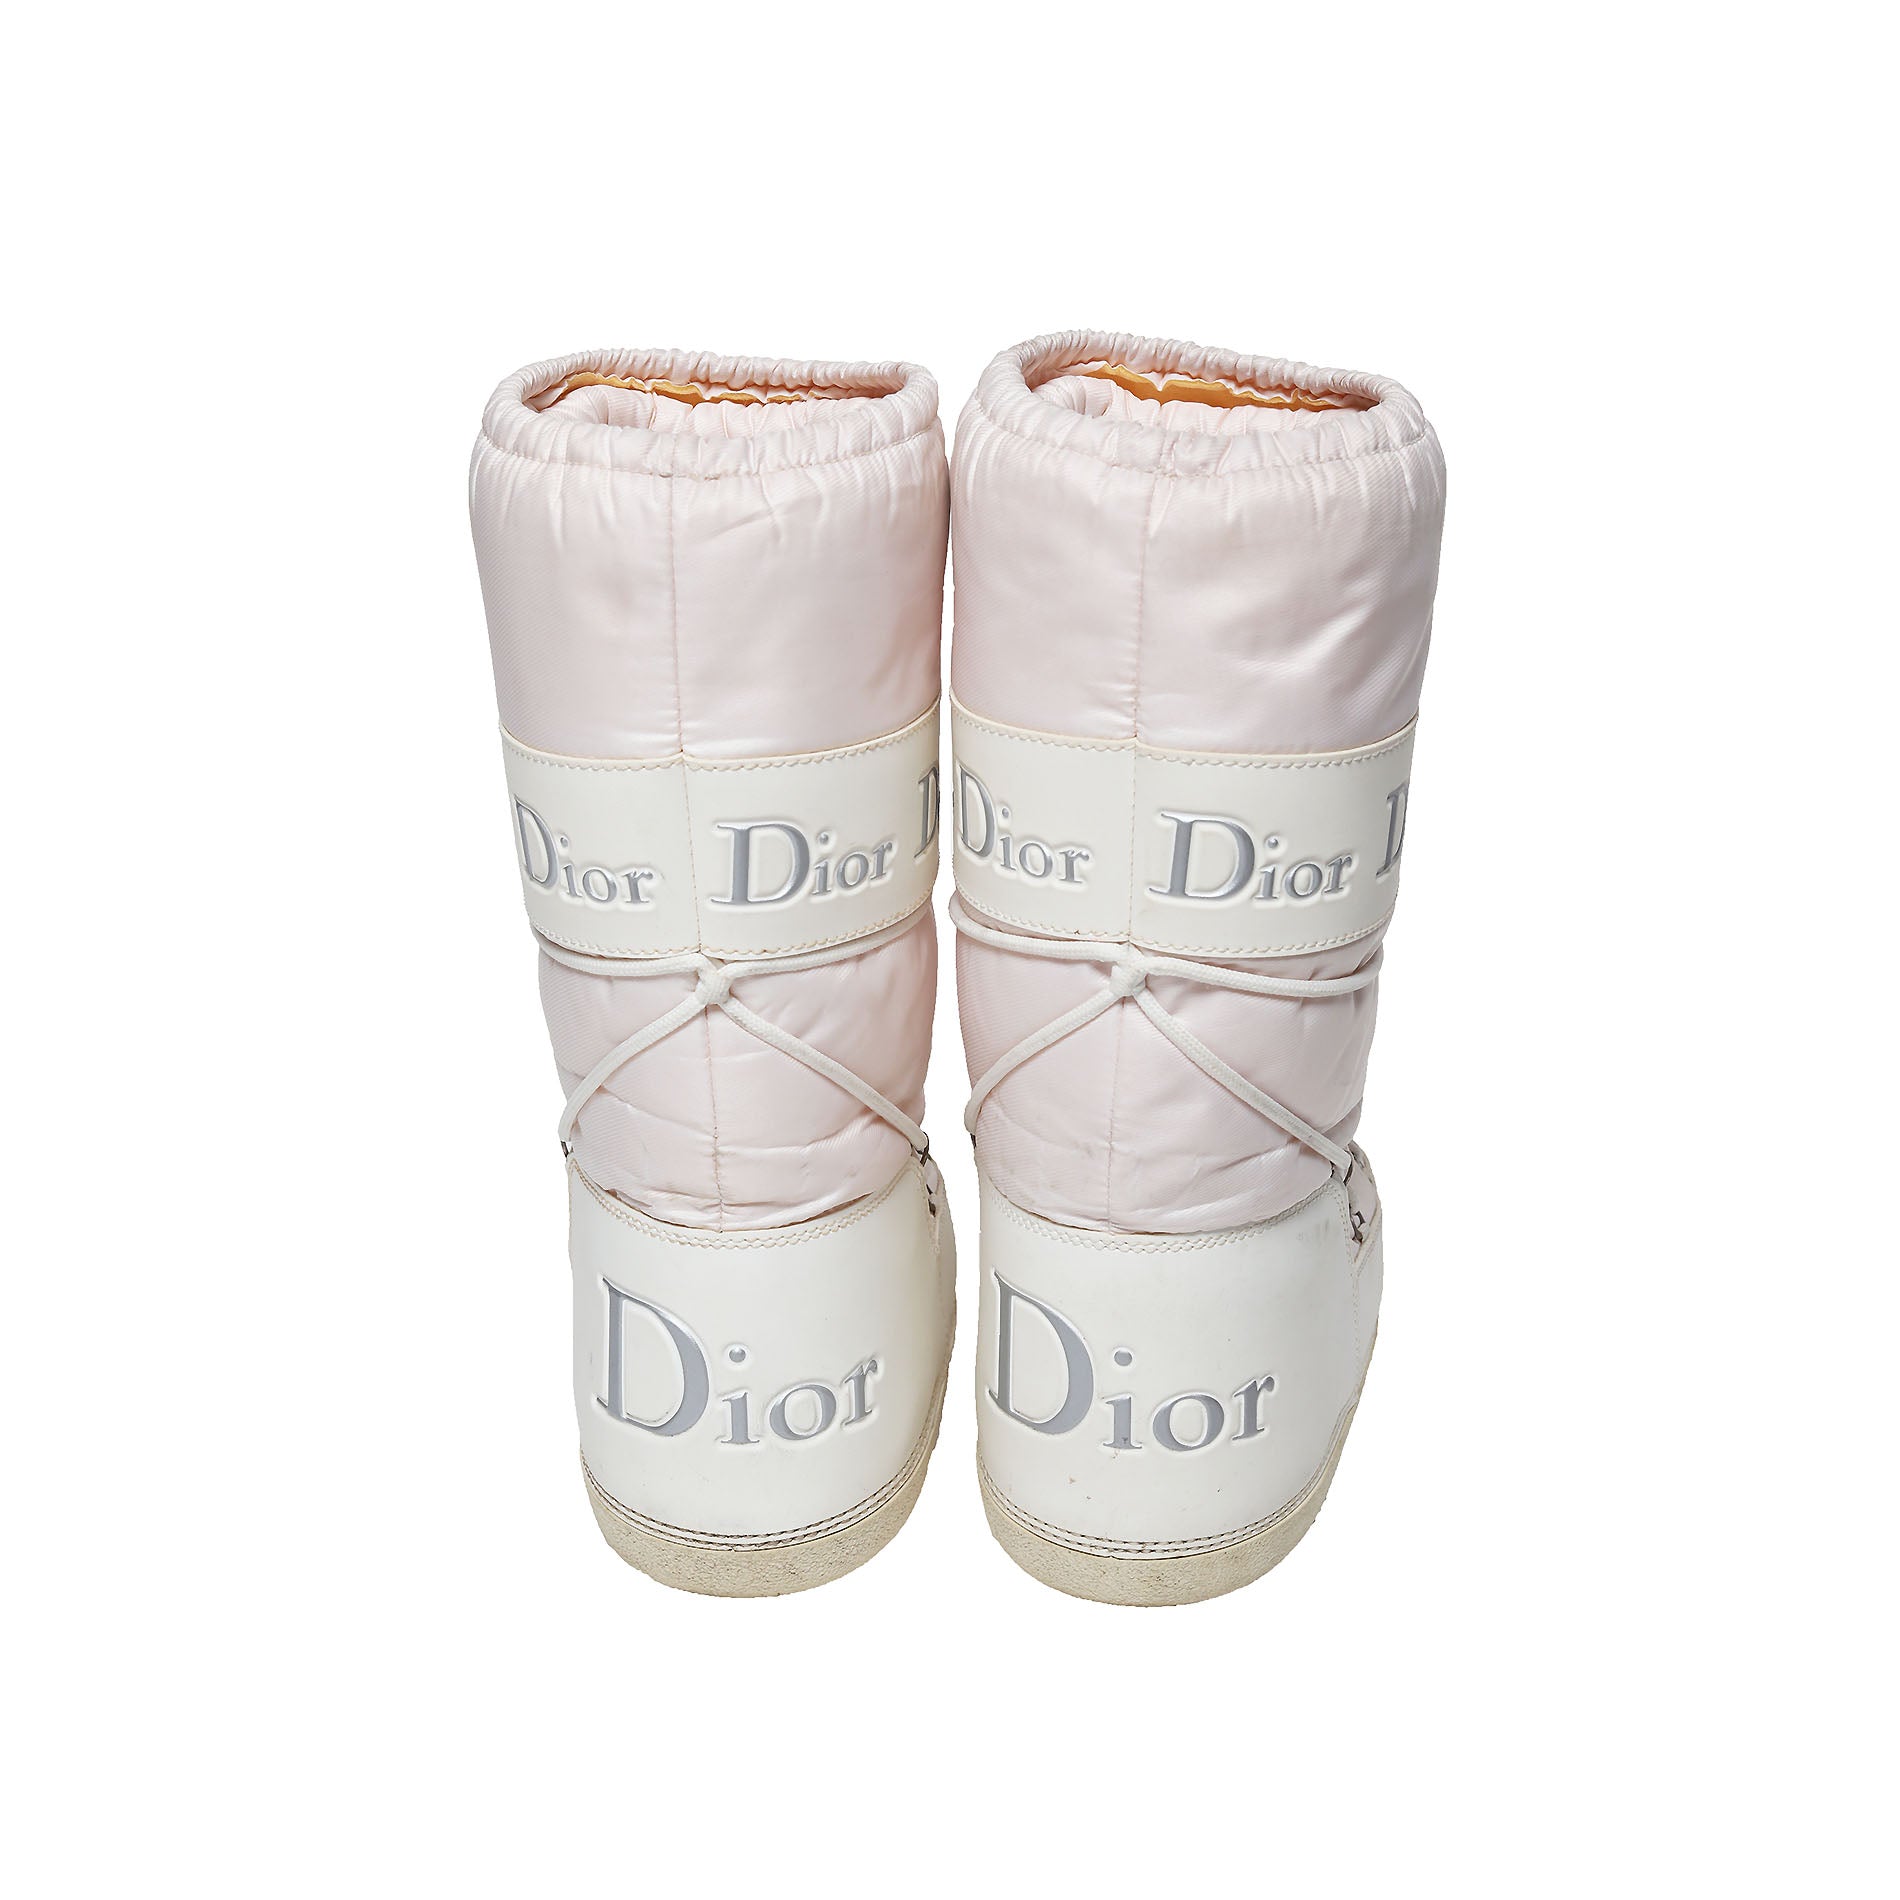 Christian Dior by John Galliano 2000s Moon Boots